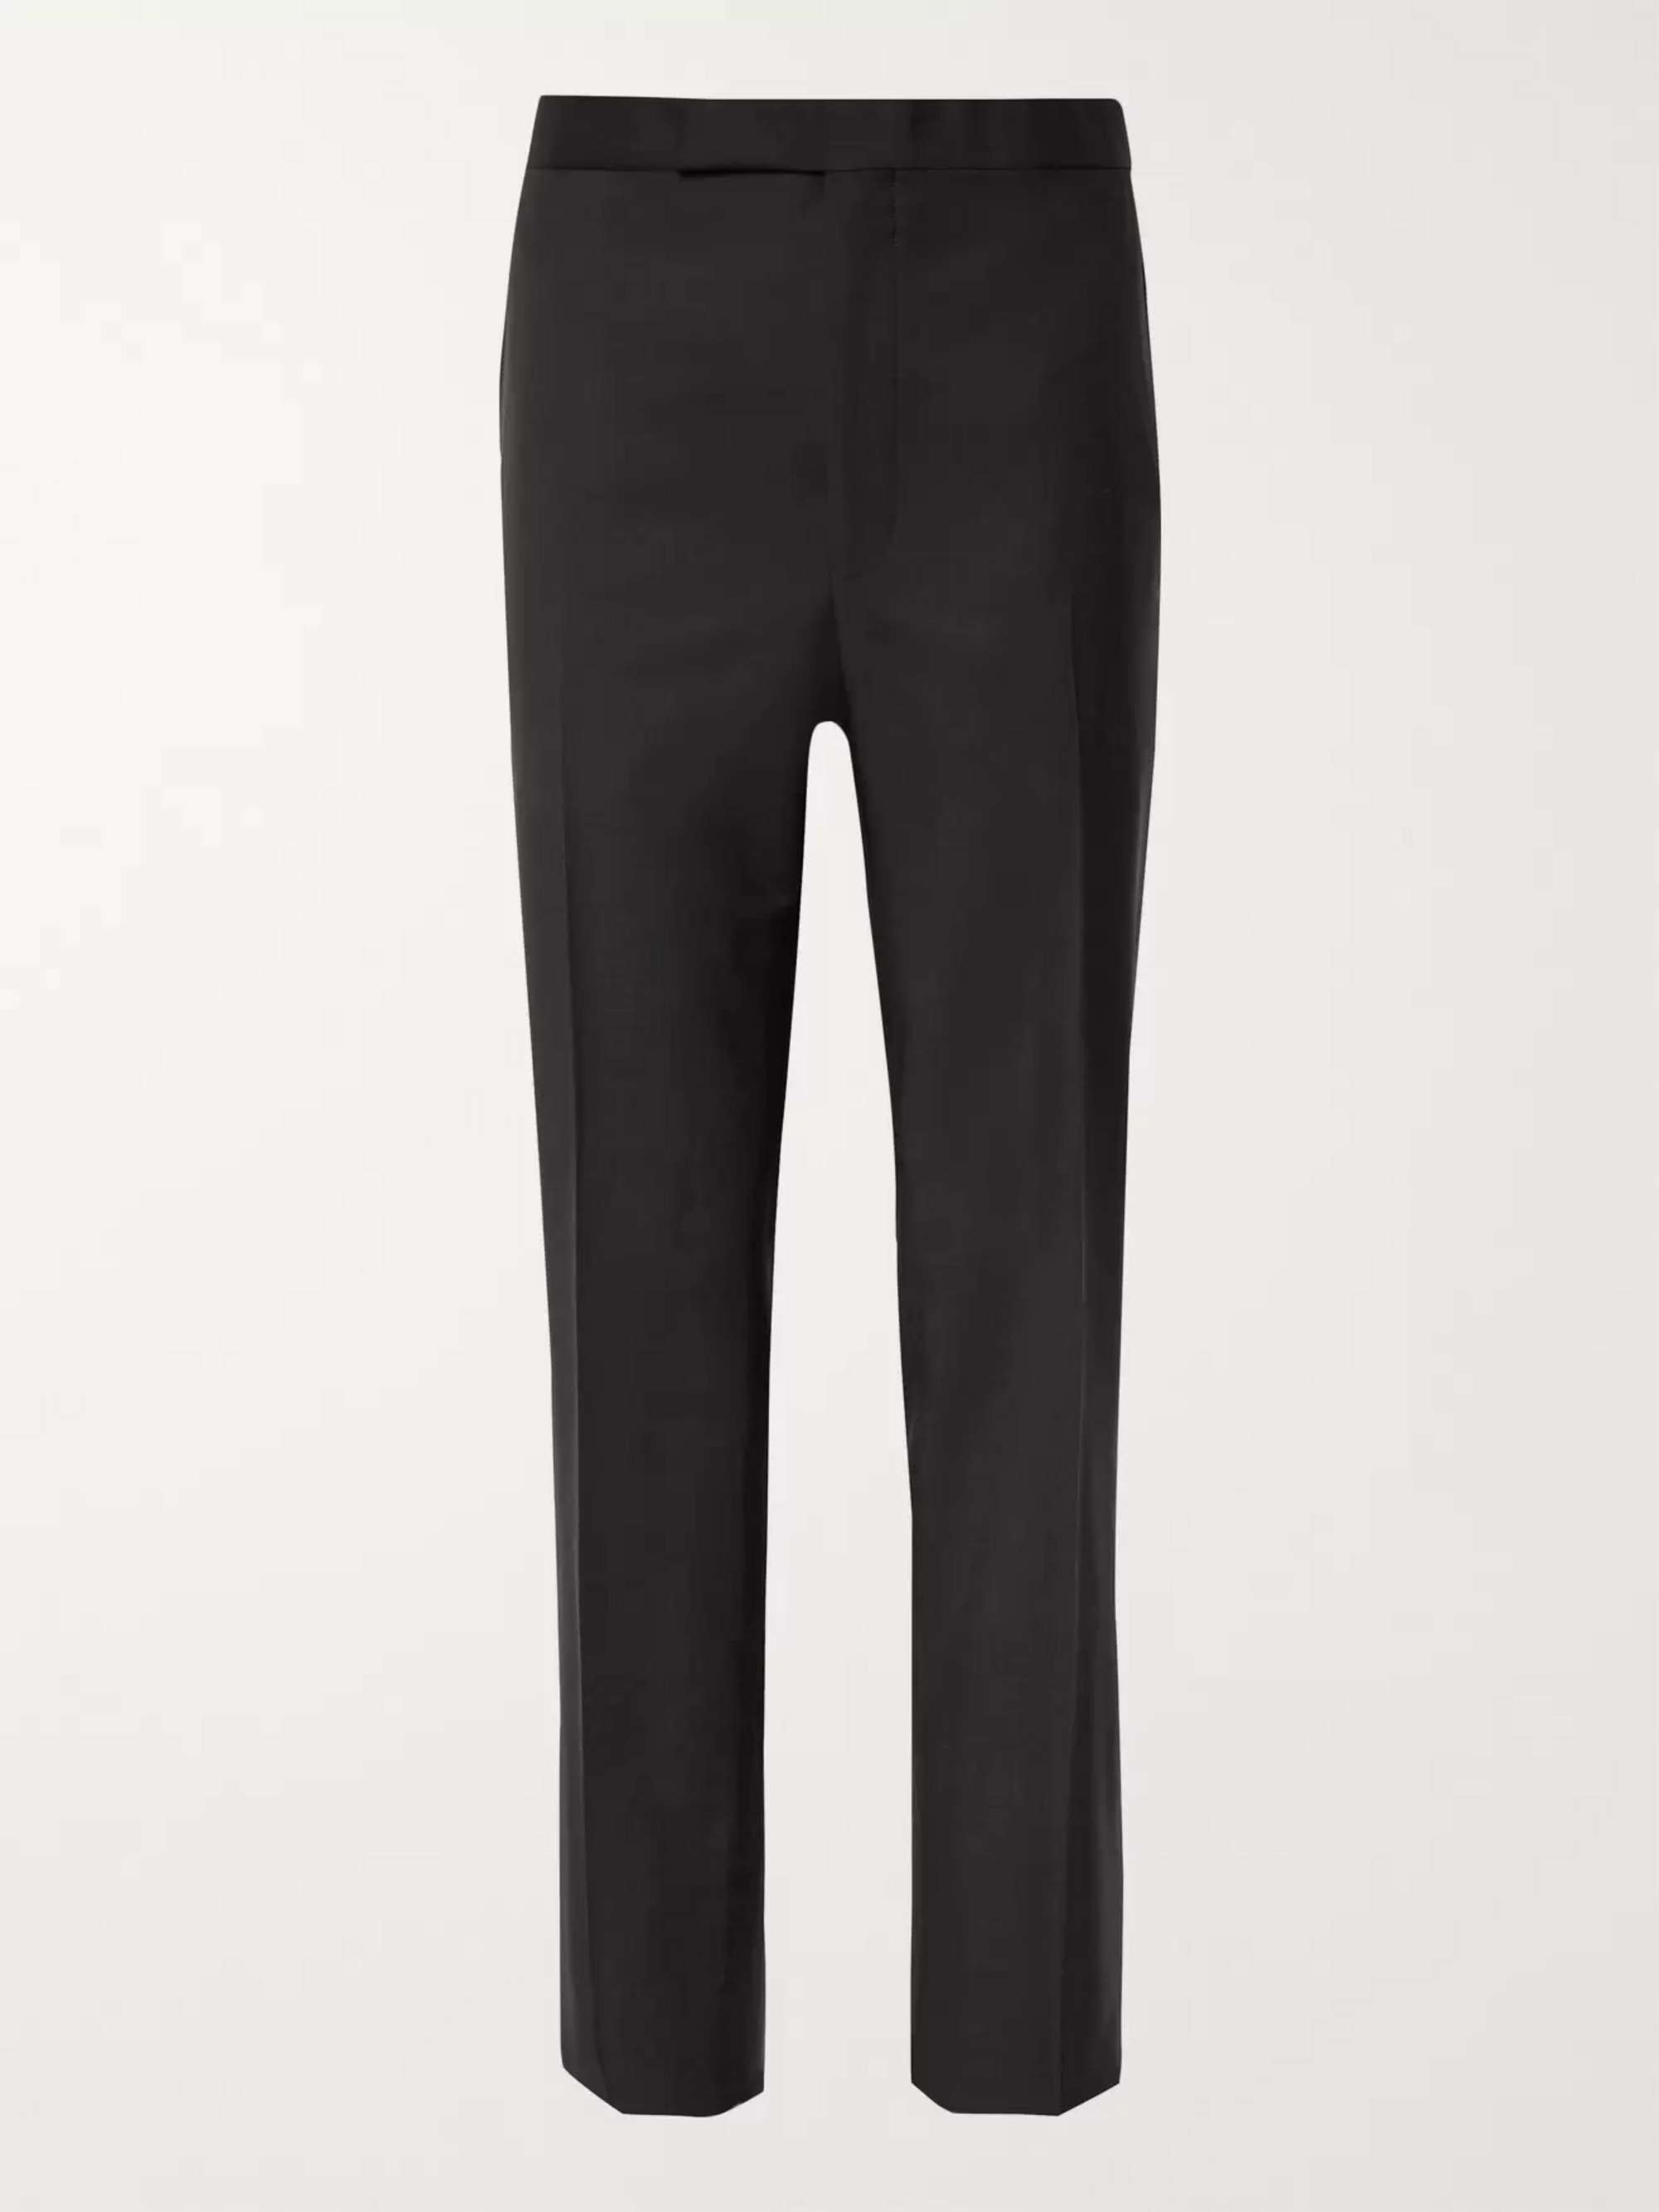 RICHARD JAMES Black Satin-Trimmed Wool and Mohair-Blend Tuxedo Trousers